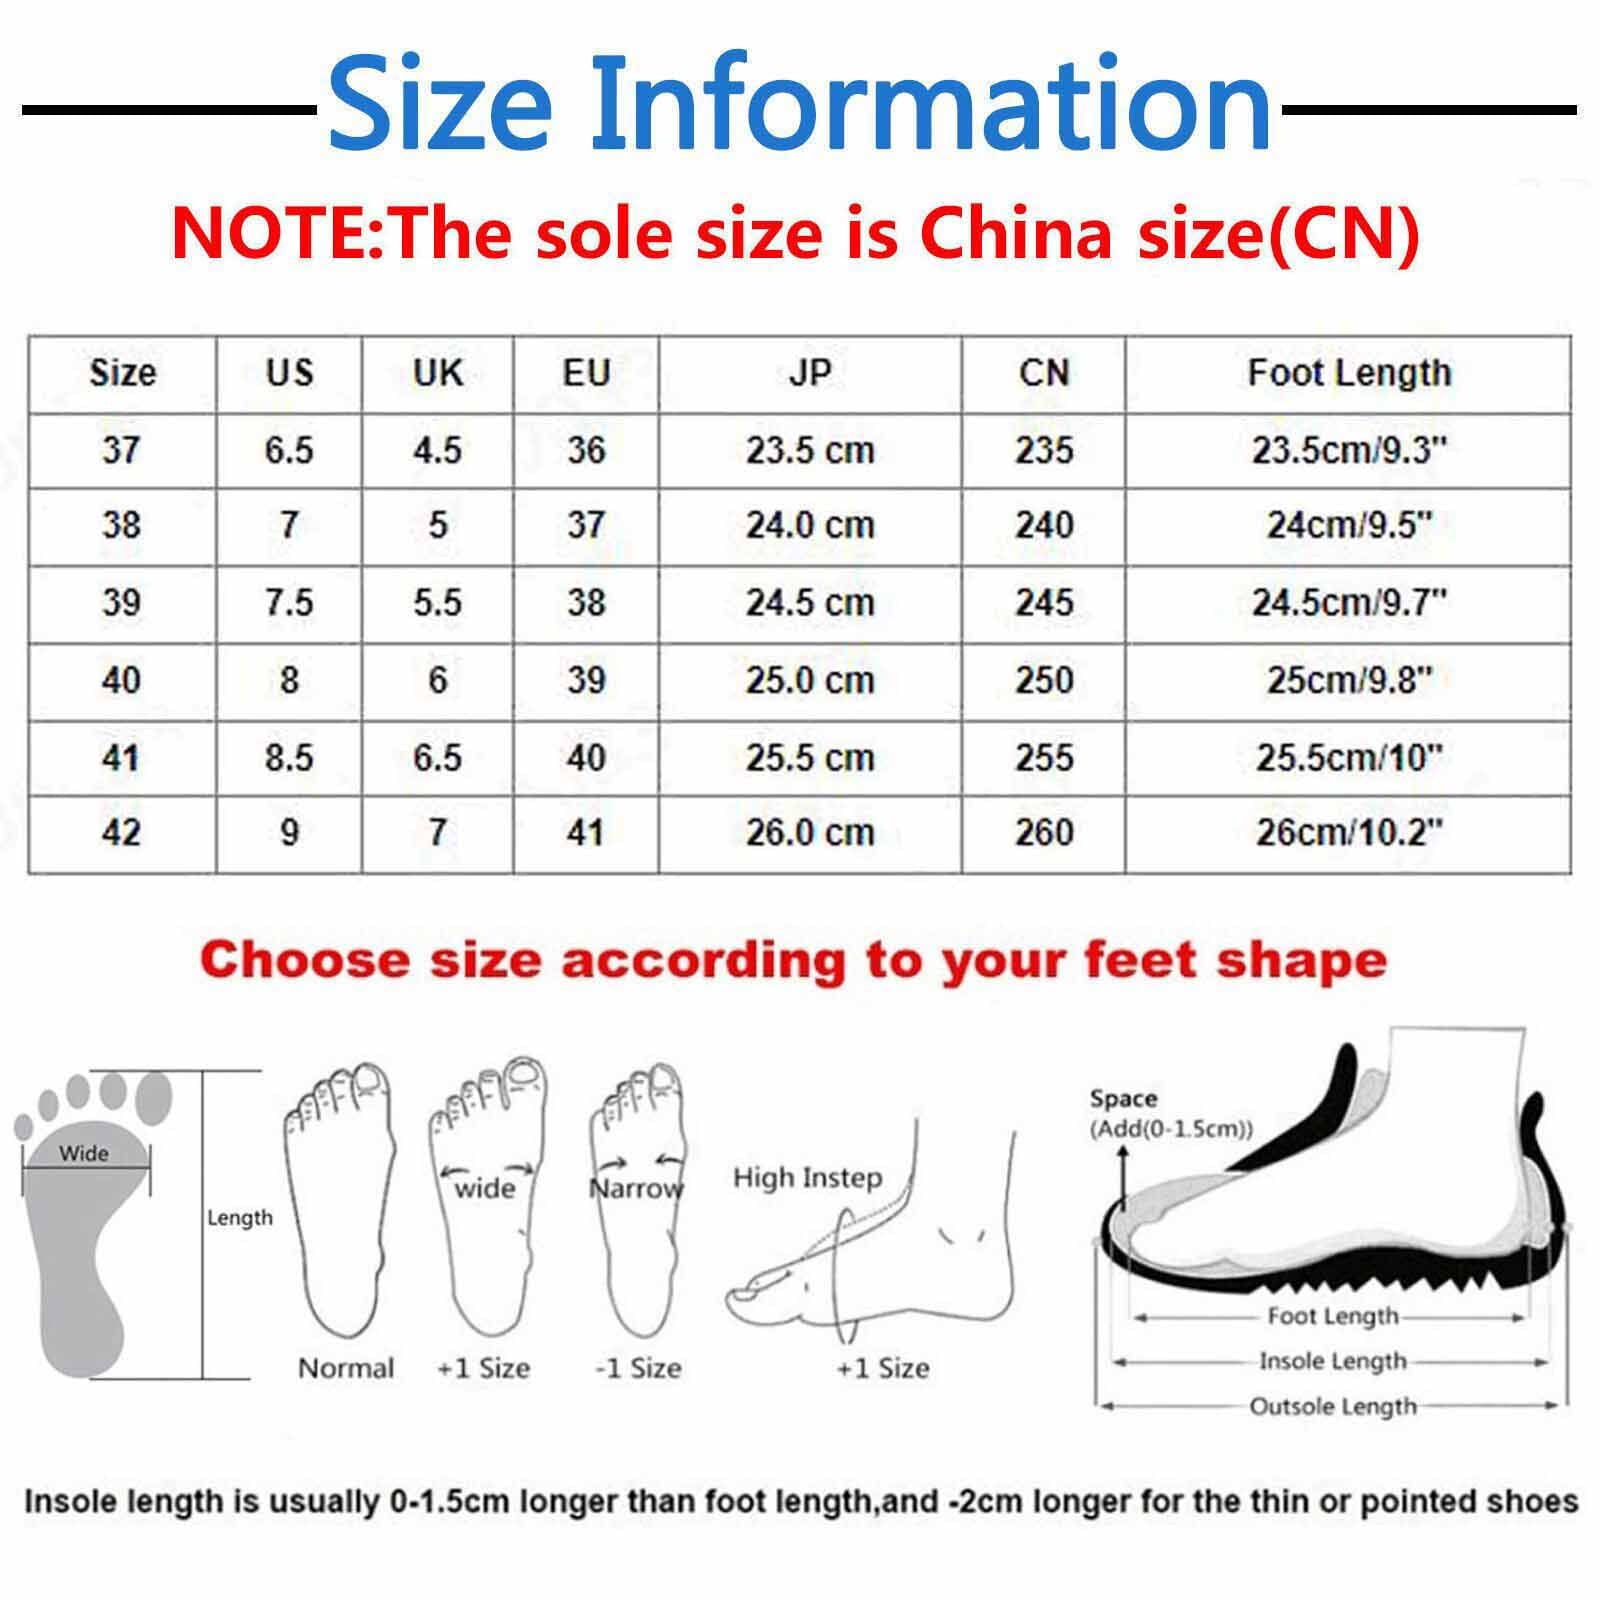 Aayomet Women Shoes Casual Slip on Ladies Fashion Solid Color Printing  Leather Round Toe Comfortable Flat Casual Shoes,Gray 6.5 